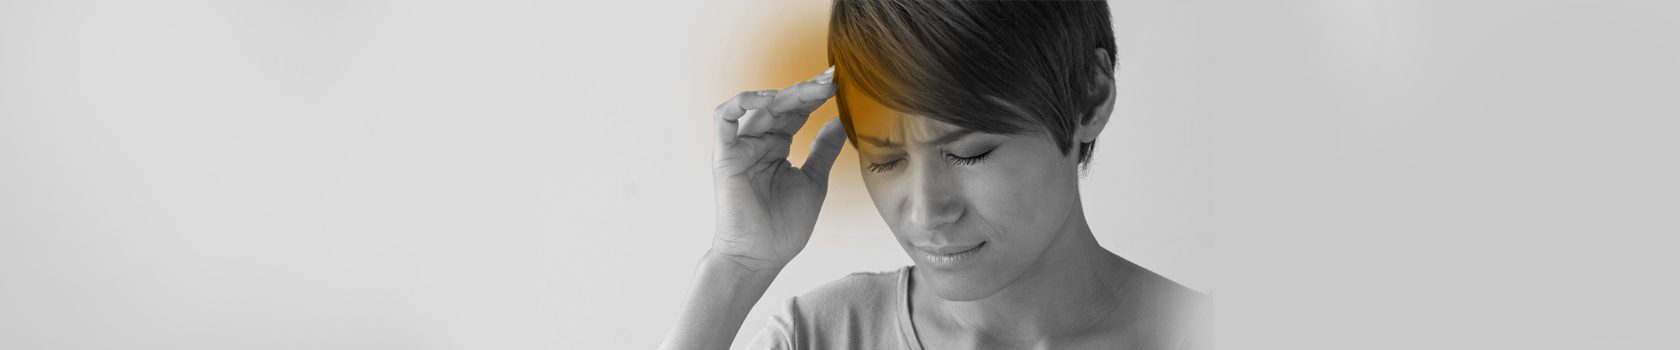 Relief from headaches using physiotherapy